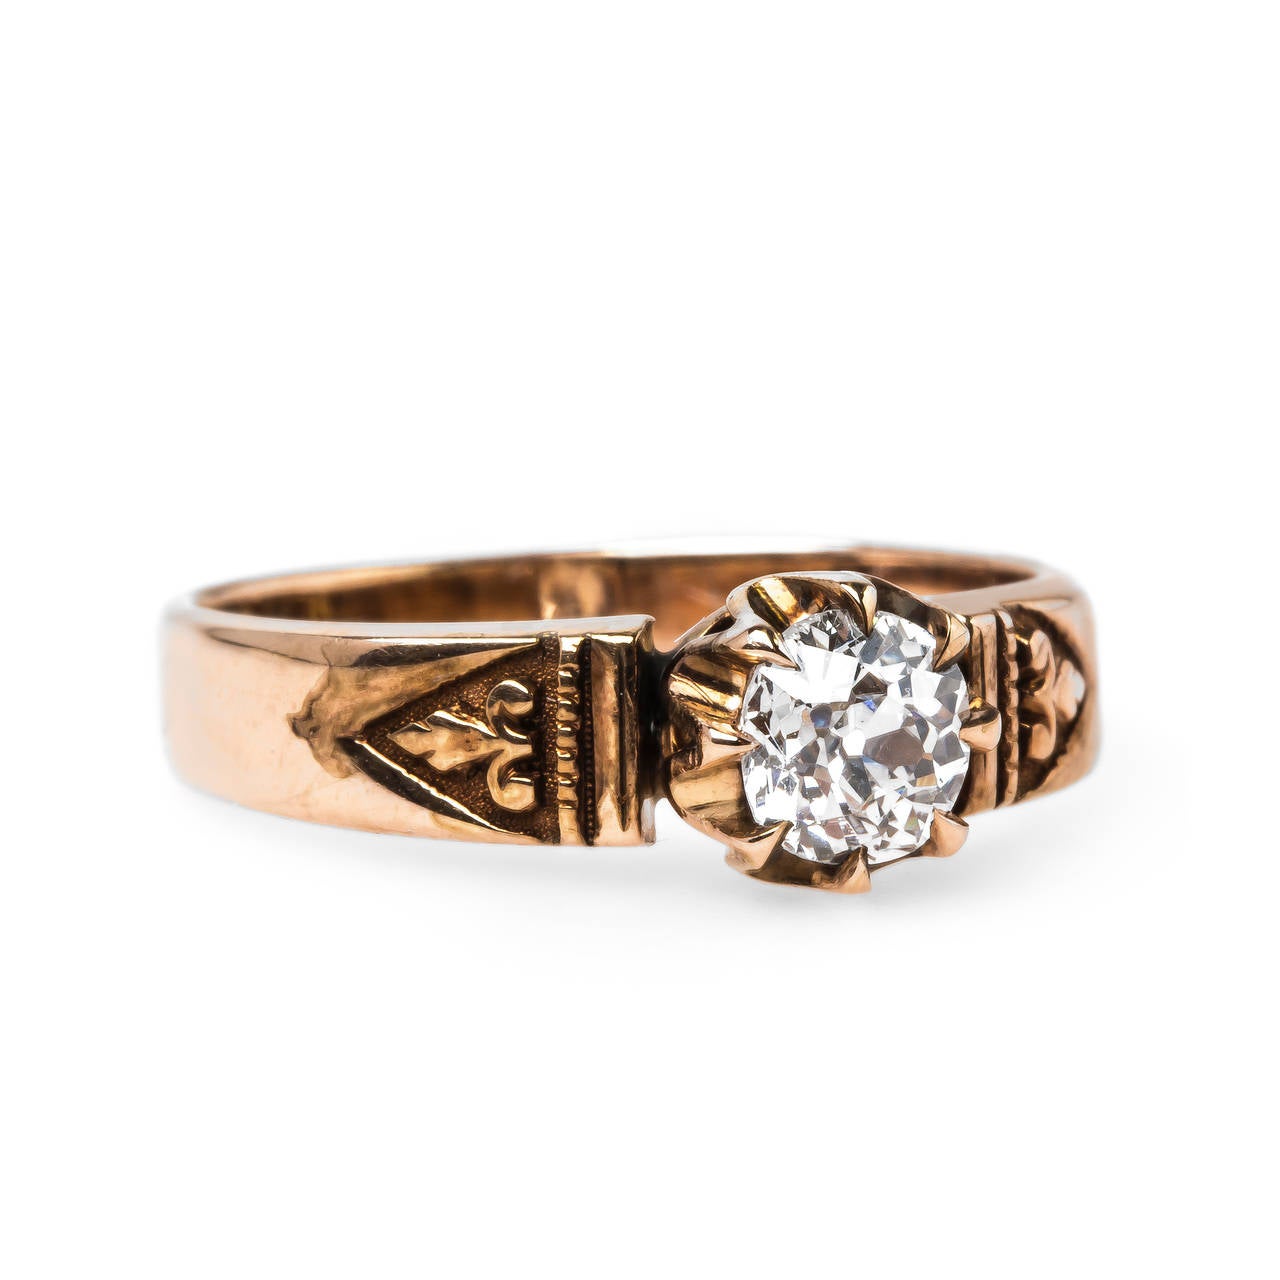 Braddock is an intriguing authentic Early Victorian era (circa 1860) 14k rose gold solitaire ring centering a eight-prong set 0.44ct EGL certified Old Mine Cut diamond graded H color and SI1 clarity. The stunning and unique antique ring is finished